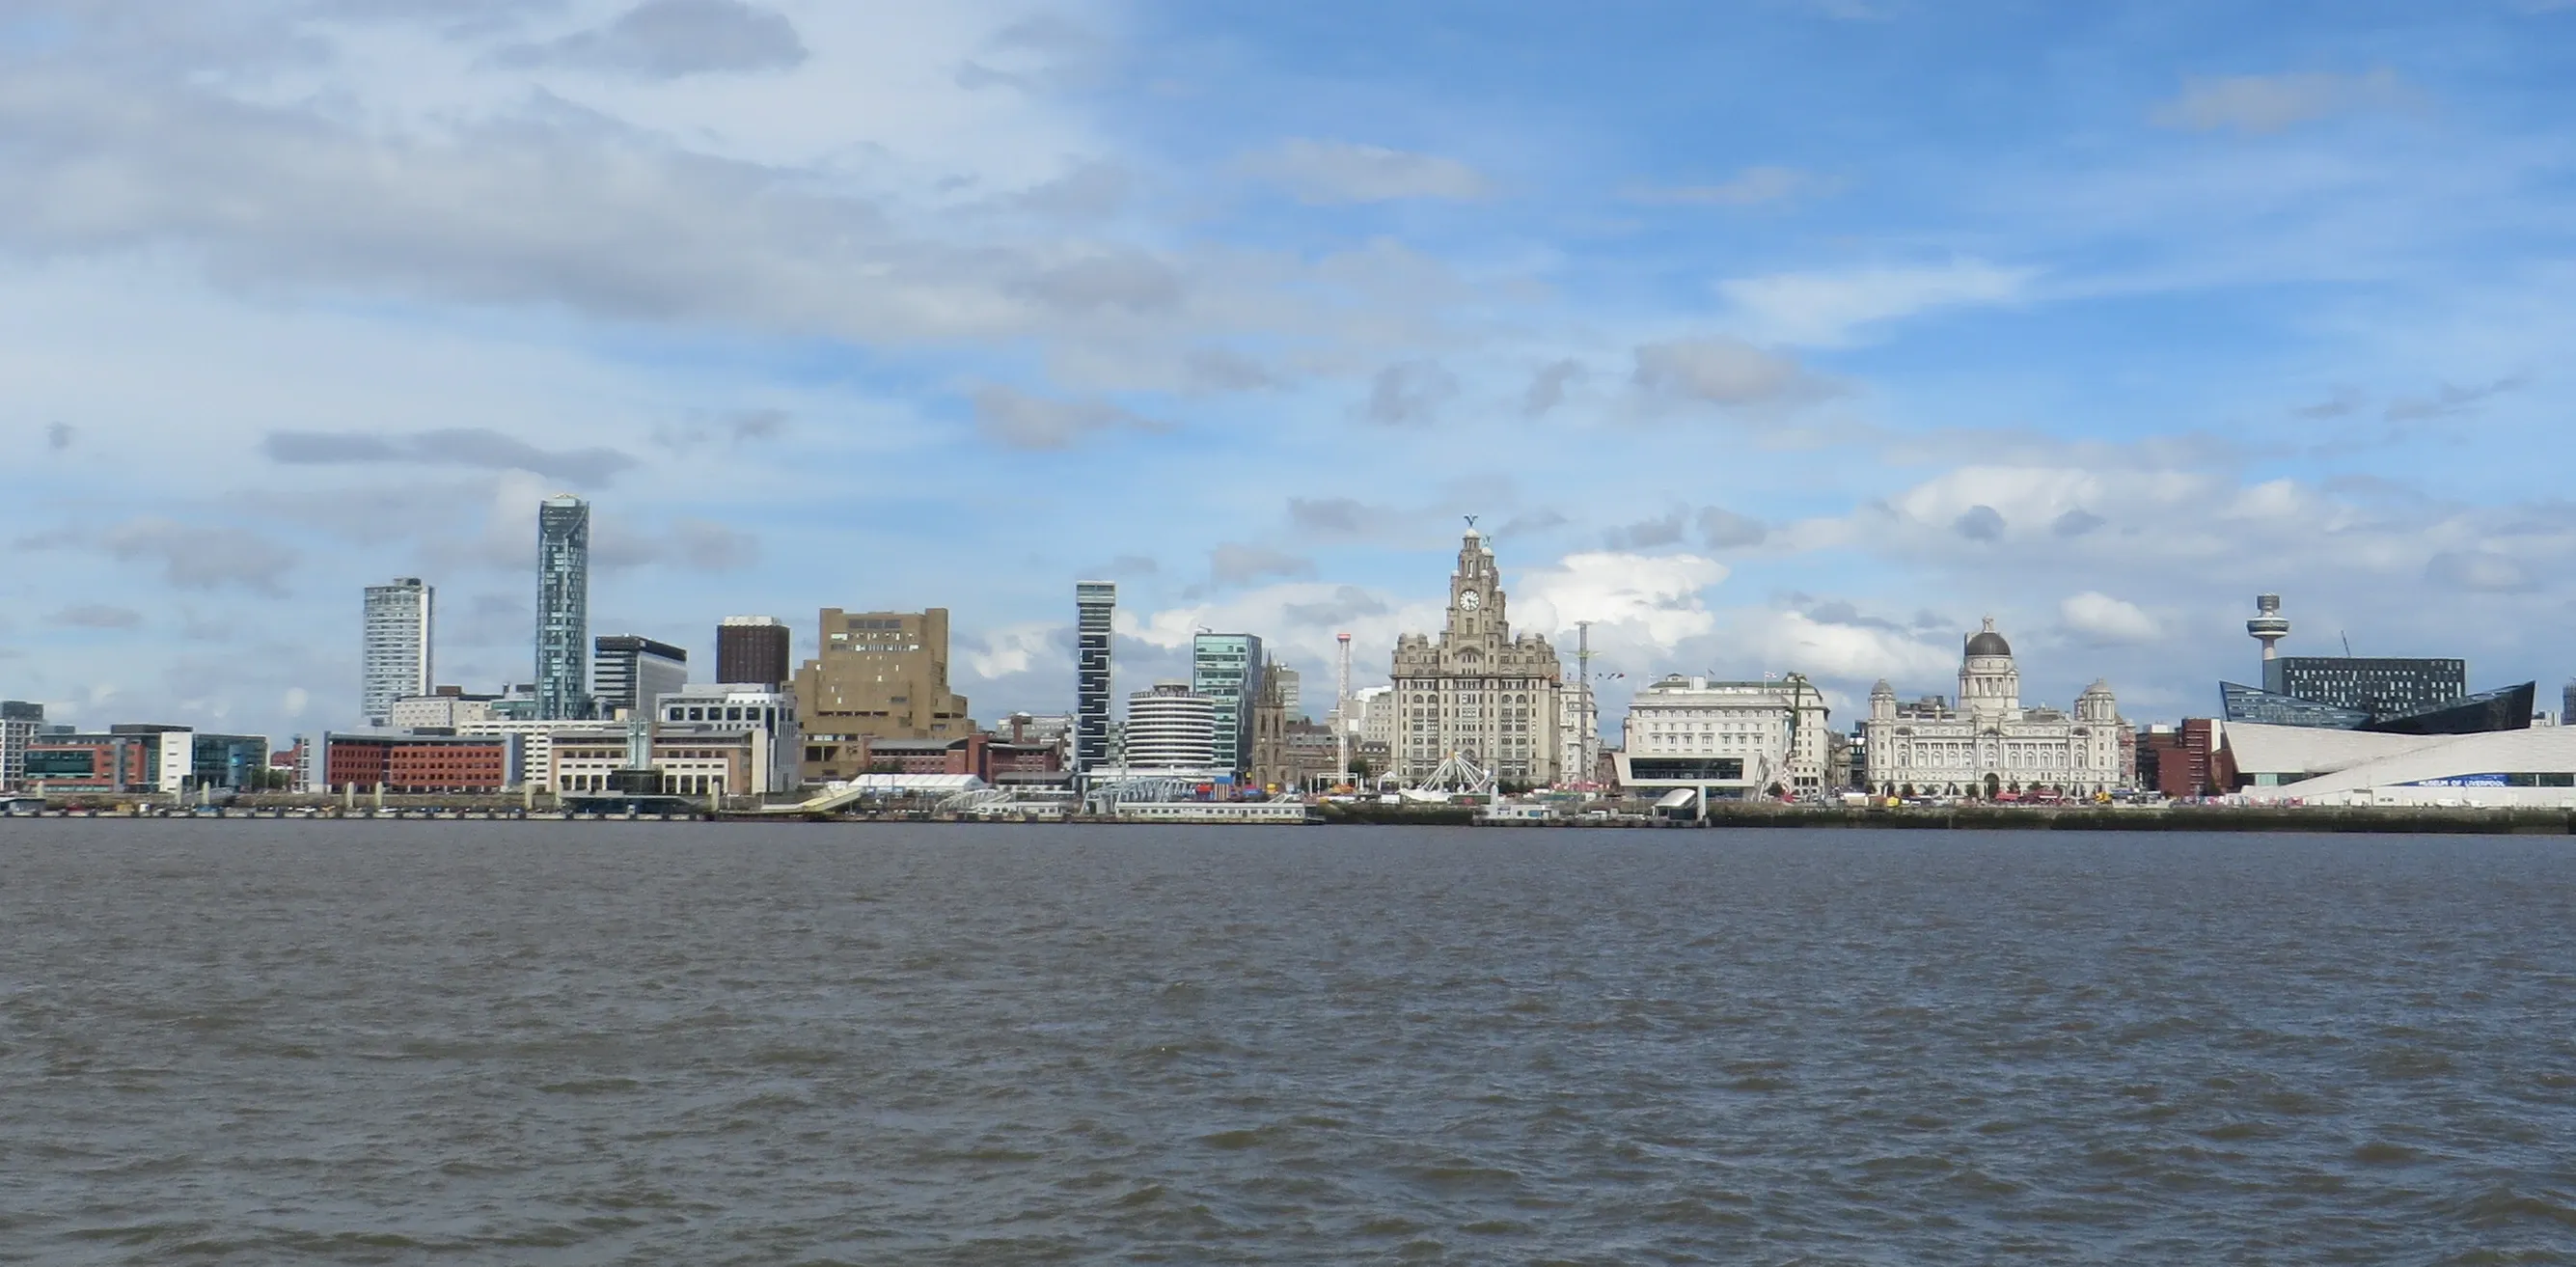 Liverpool Waterfront including Three Graces